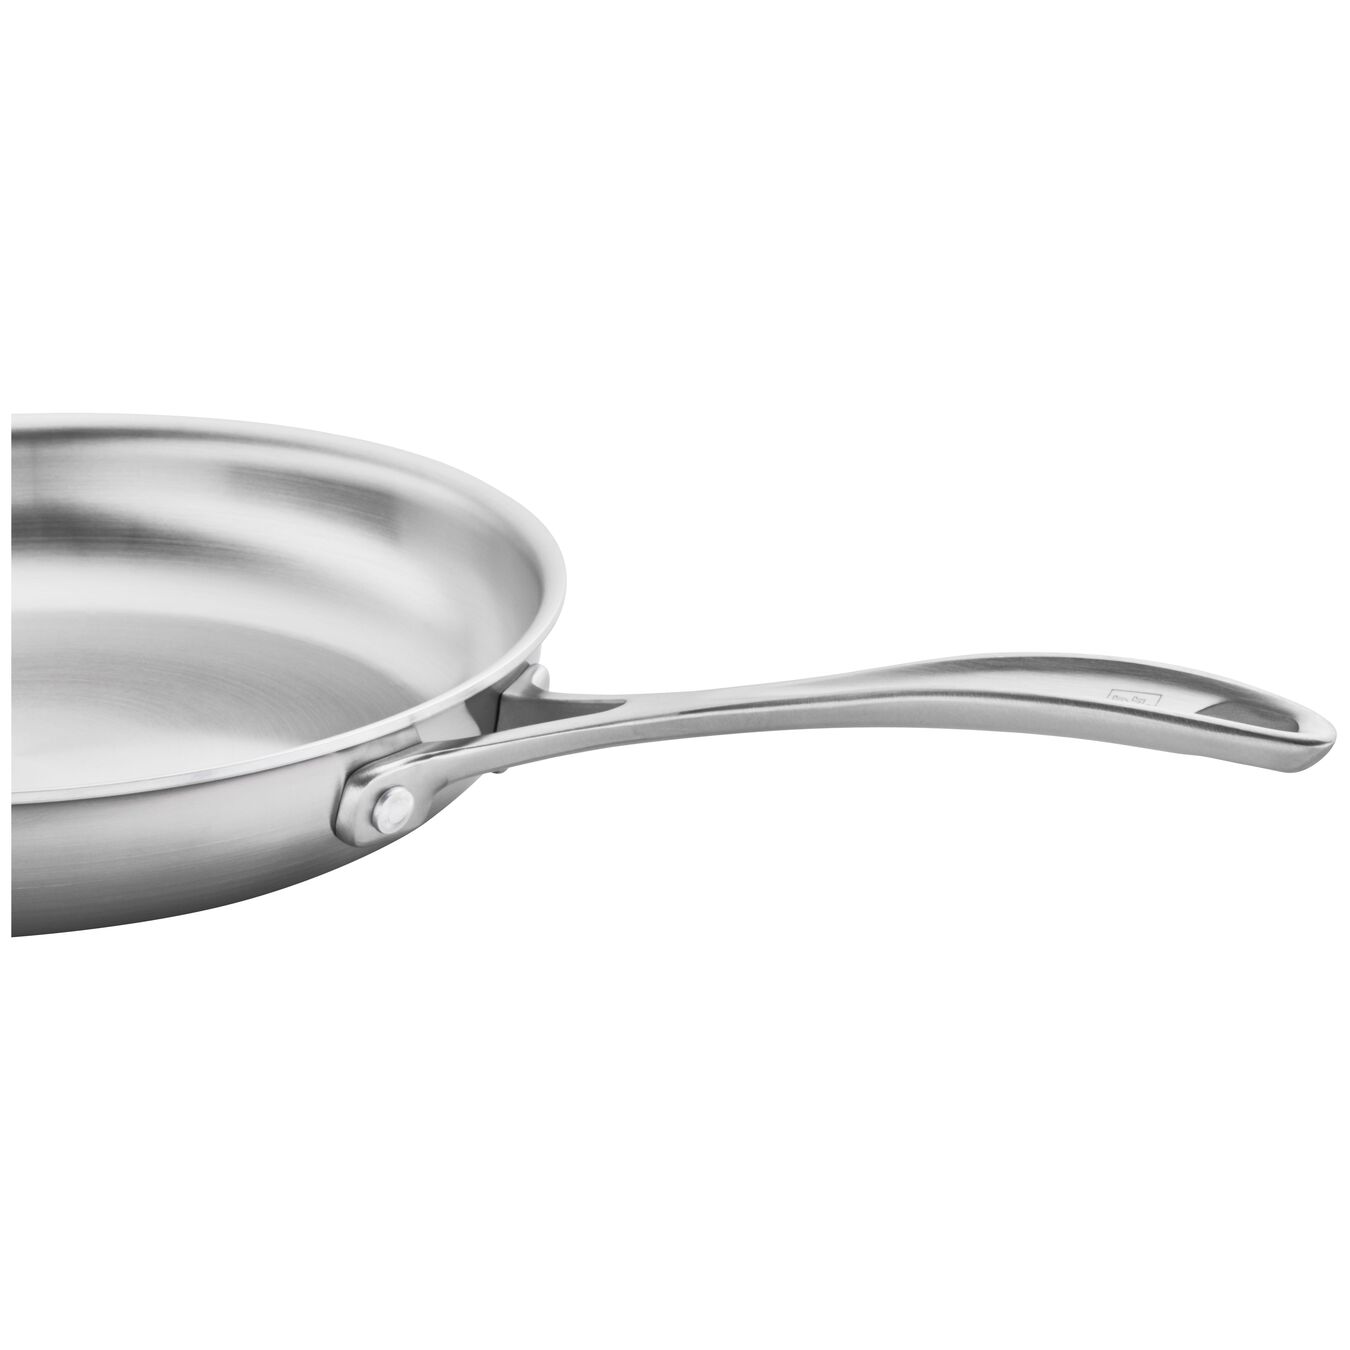 ZWILLING Spirit 3-Ply 10-inch, 18/10 Stainless Steel, Frying pan Zwilling 18/10 Stainless Steel 3 Ply